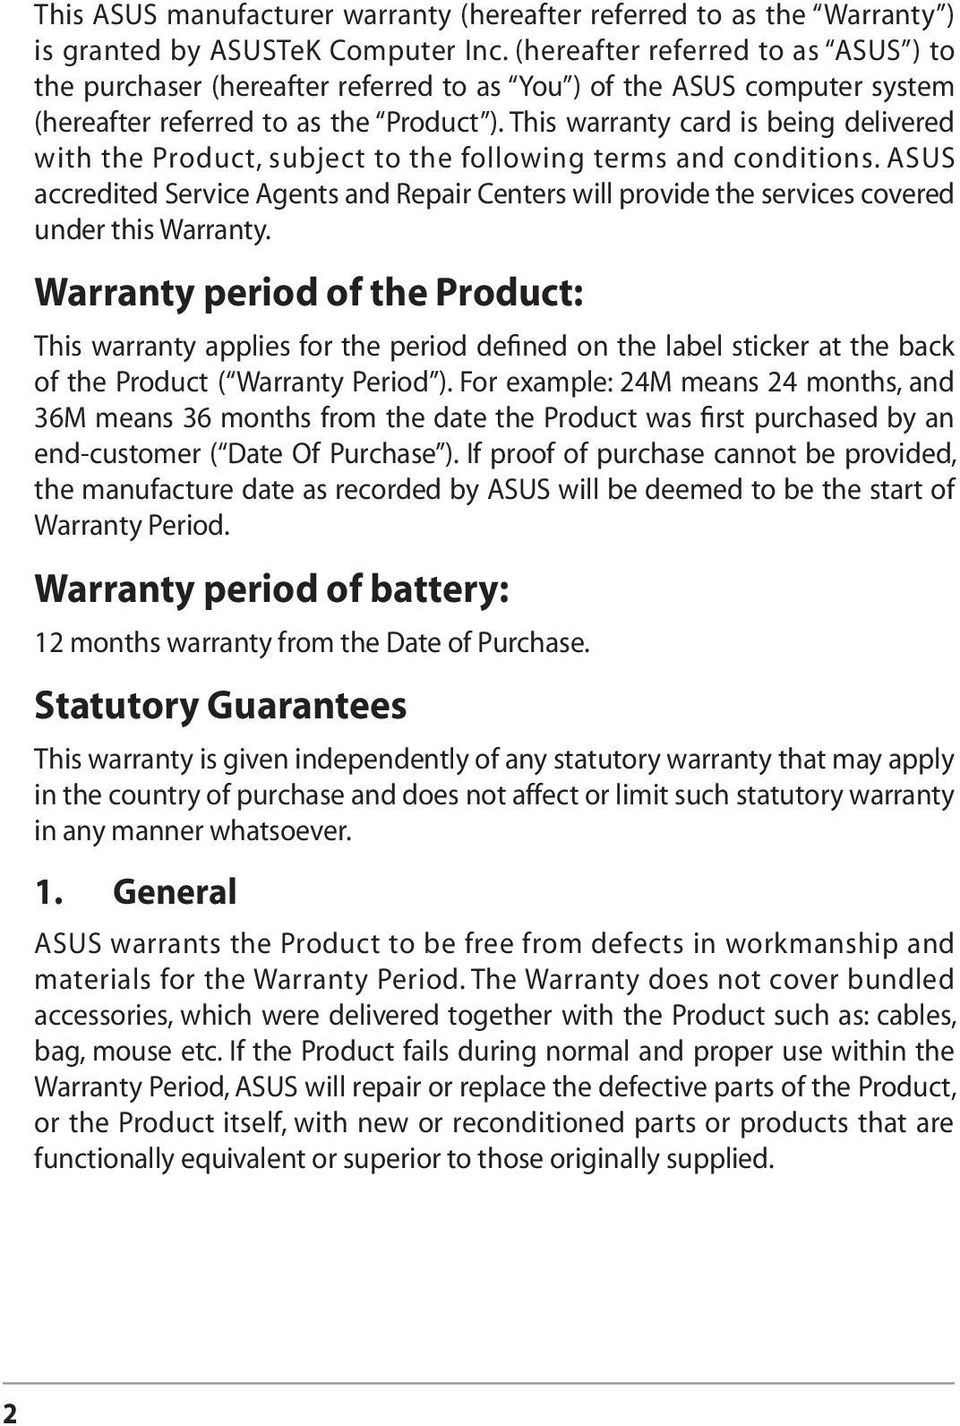 This warranty card is being delivered with the Product, subject to the following terms and conditions.